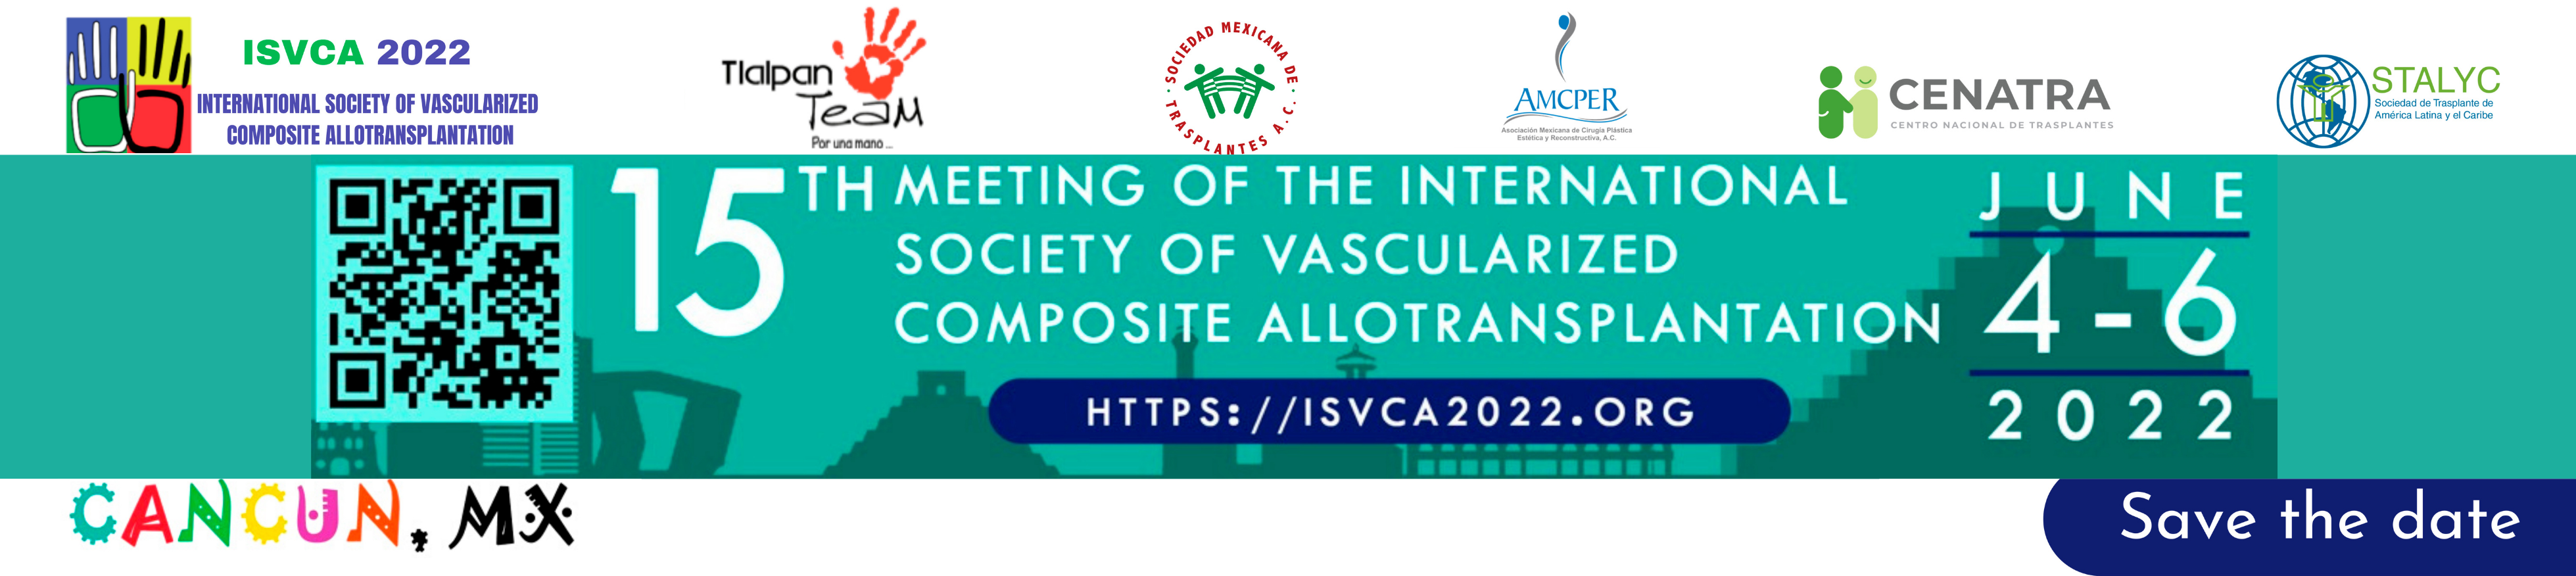 15th Meeting of the international society of vascularized composite allotransplantation